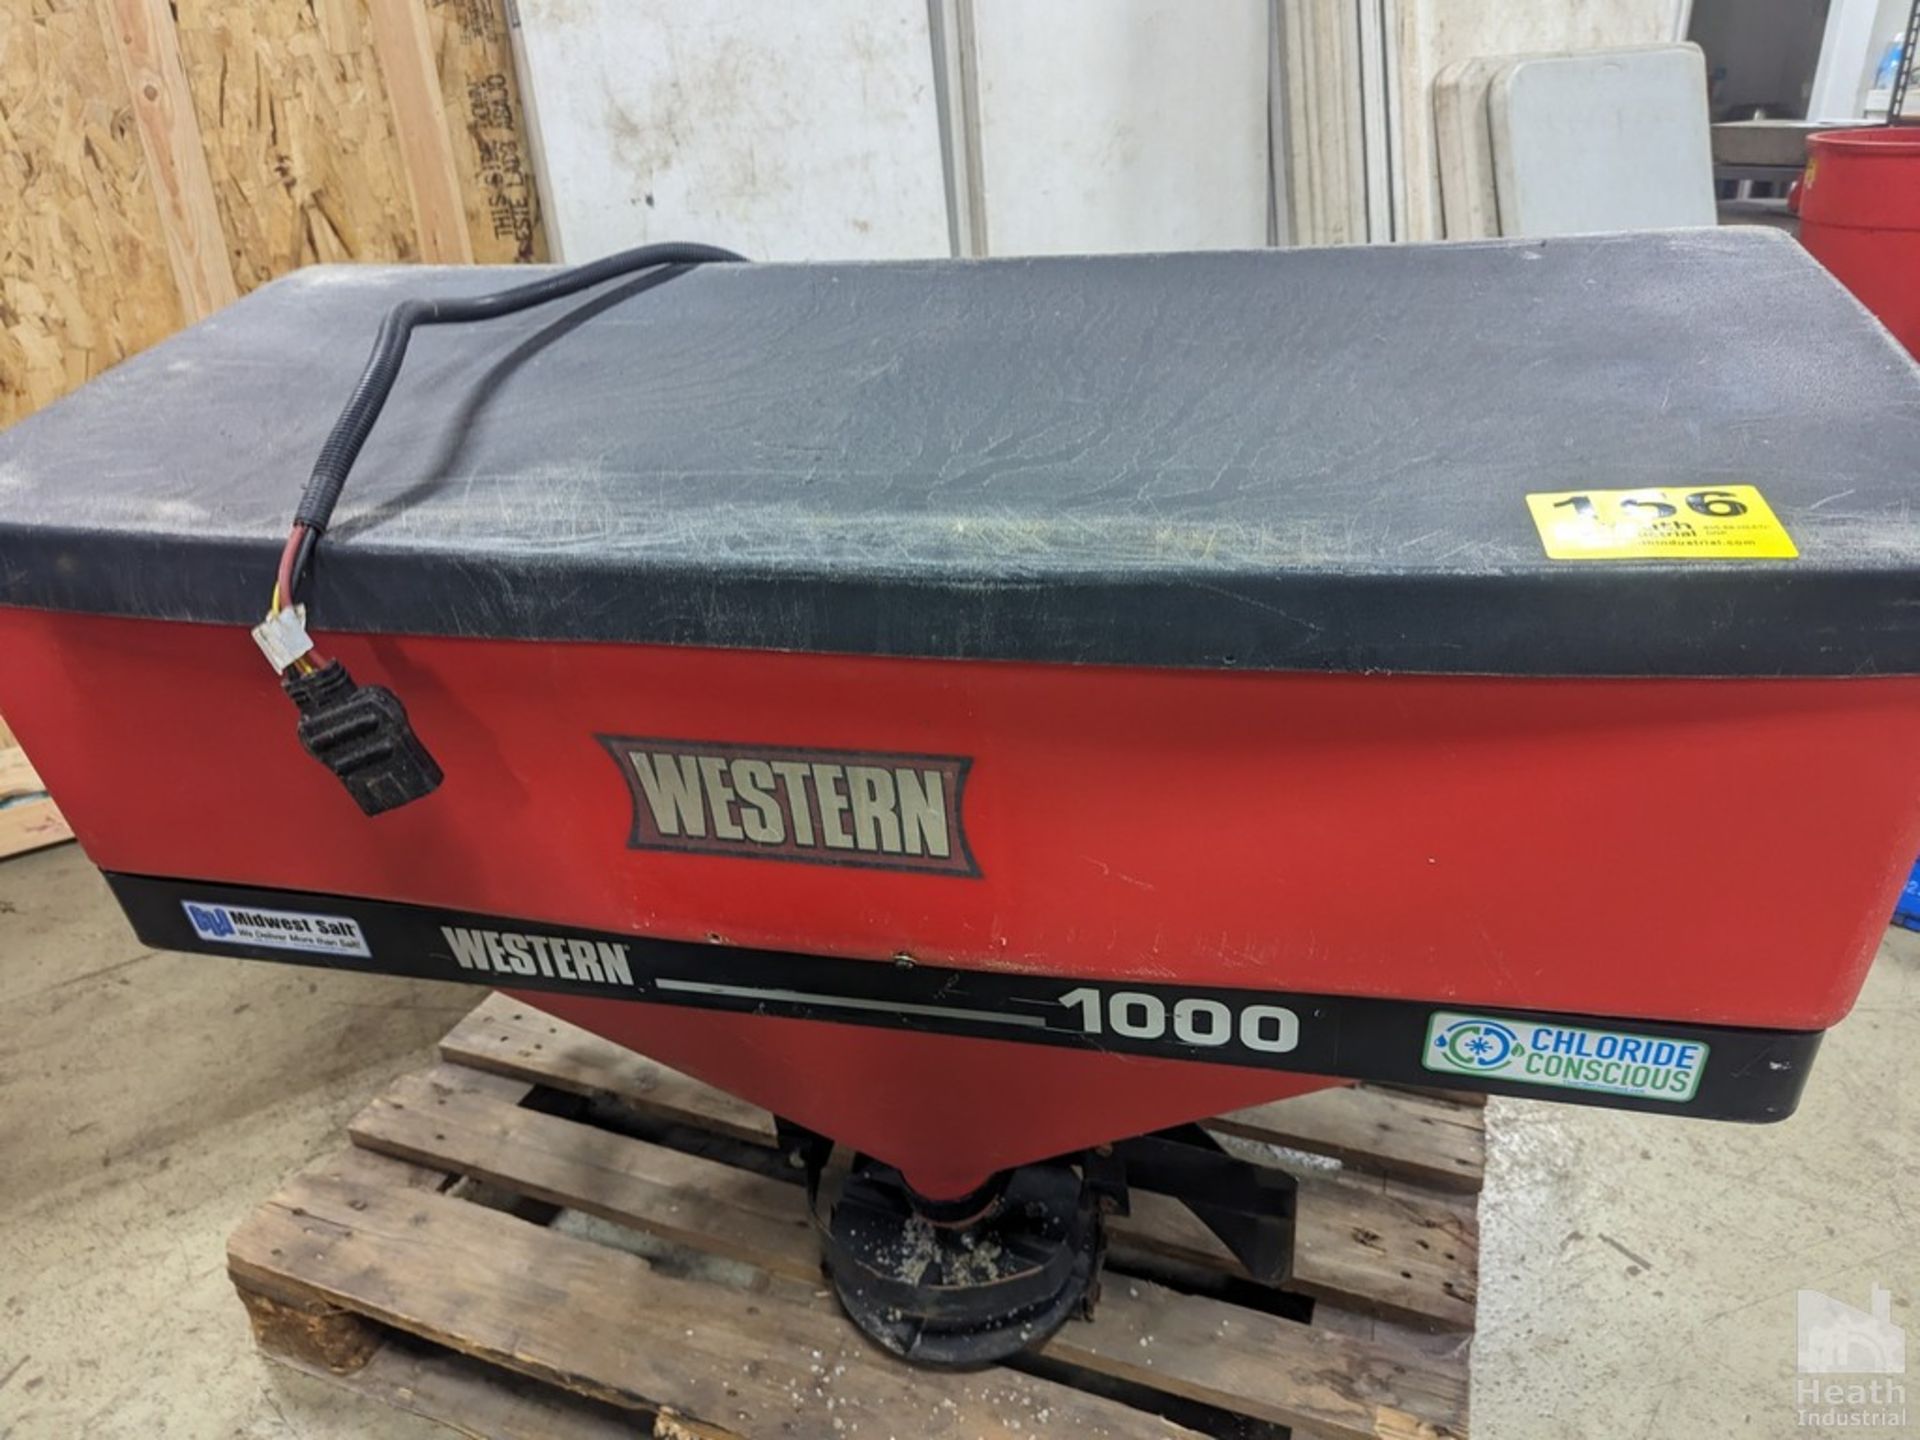 WESTERN 1000 LOW PROFILE POLY TAILGATE SALT SPREADER - Image 3 of 6